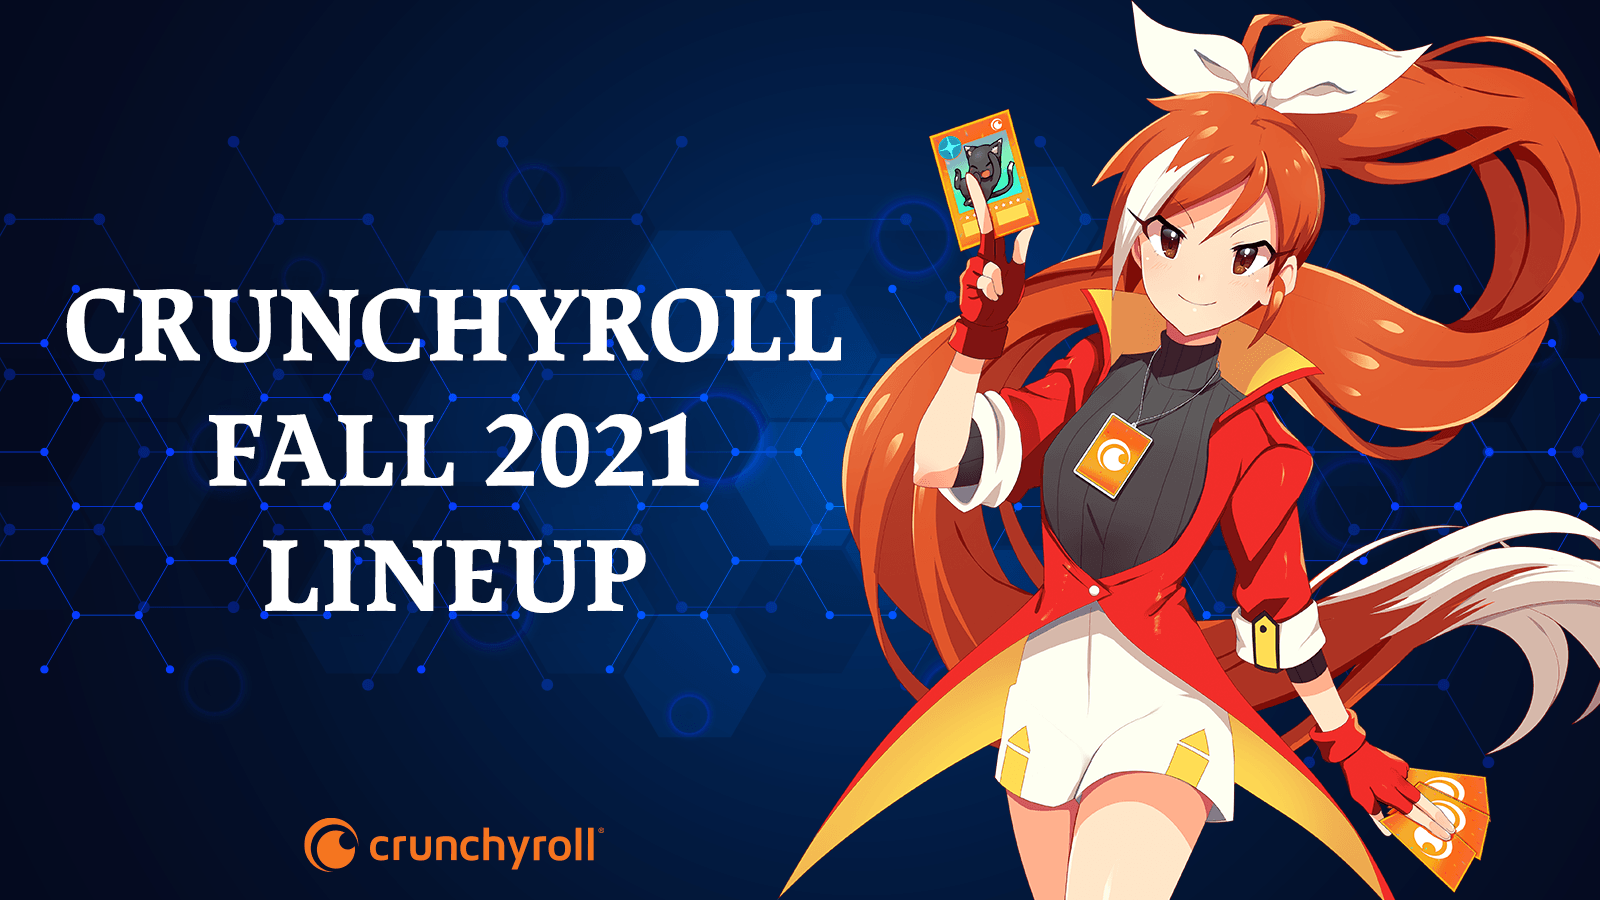 Crunchyroll Announces its Anime Lineup for Fall 2021 | Cord Cutters News